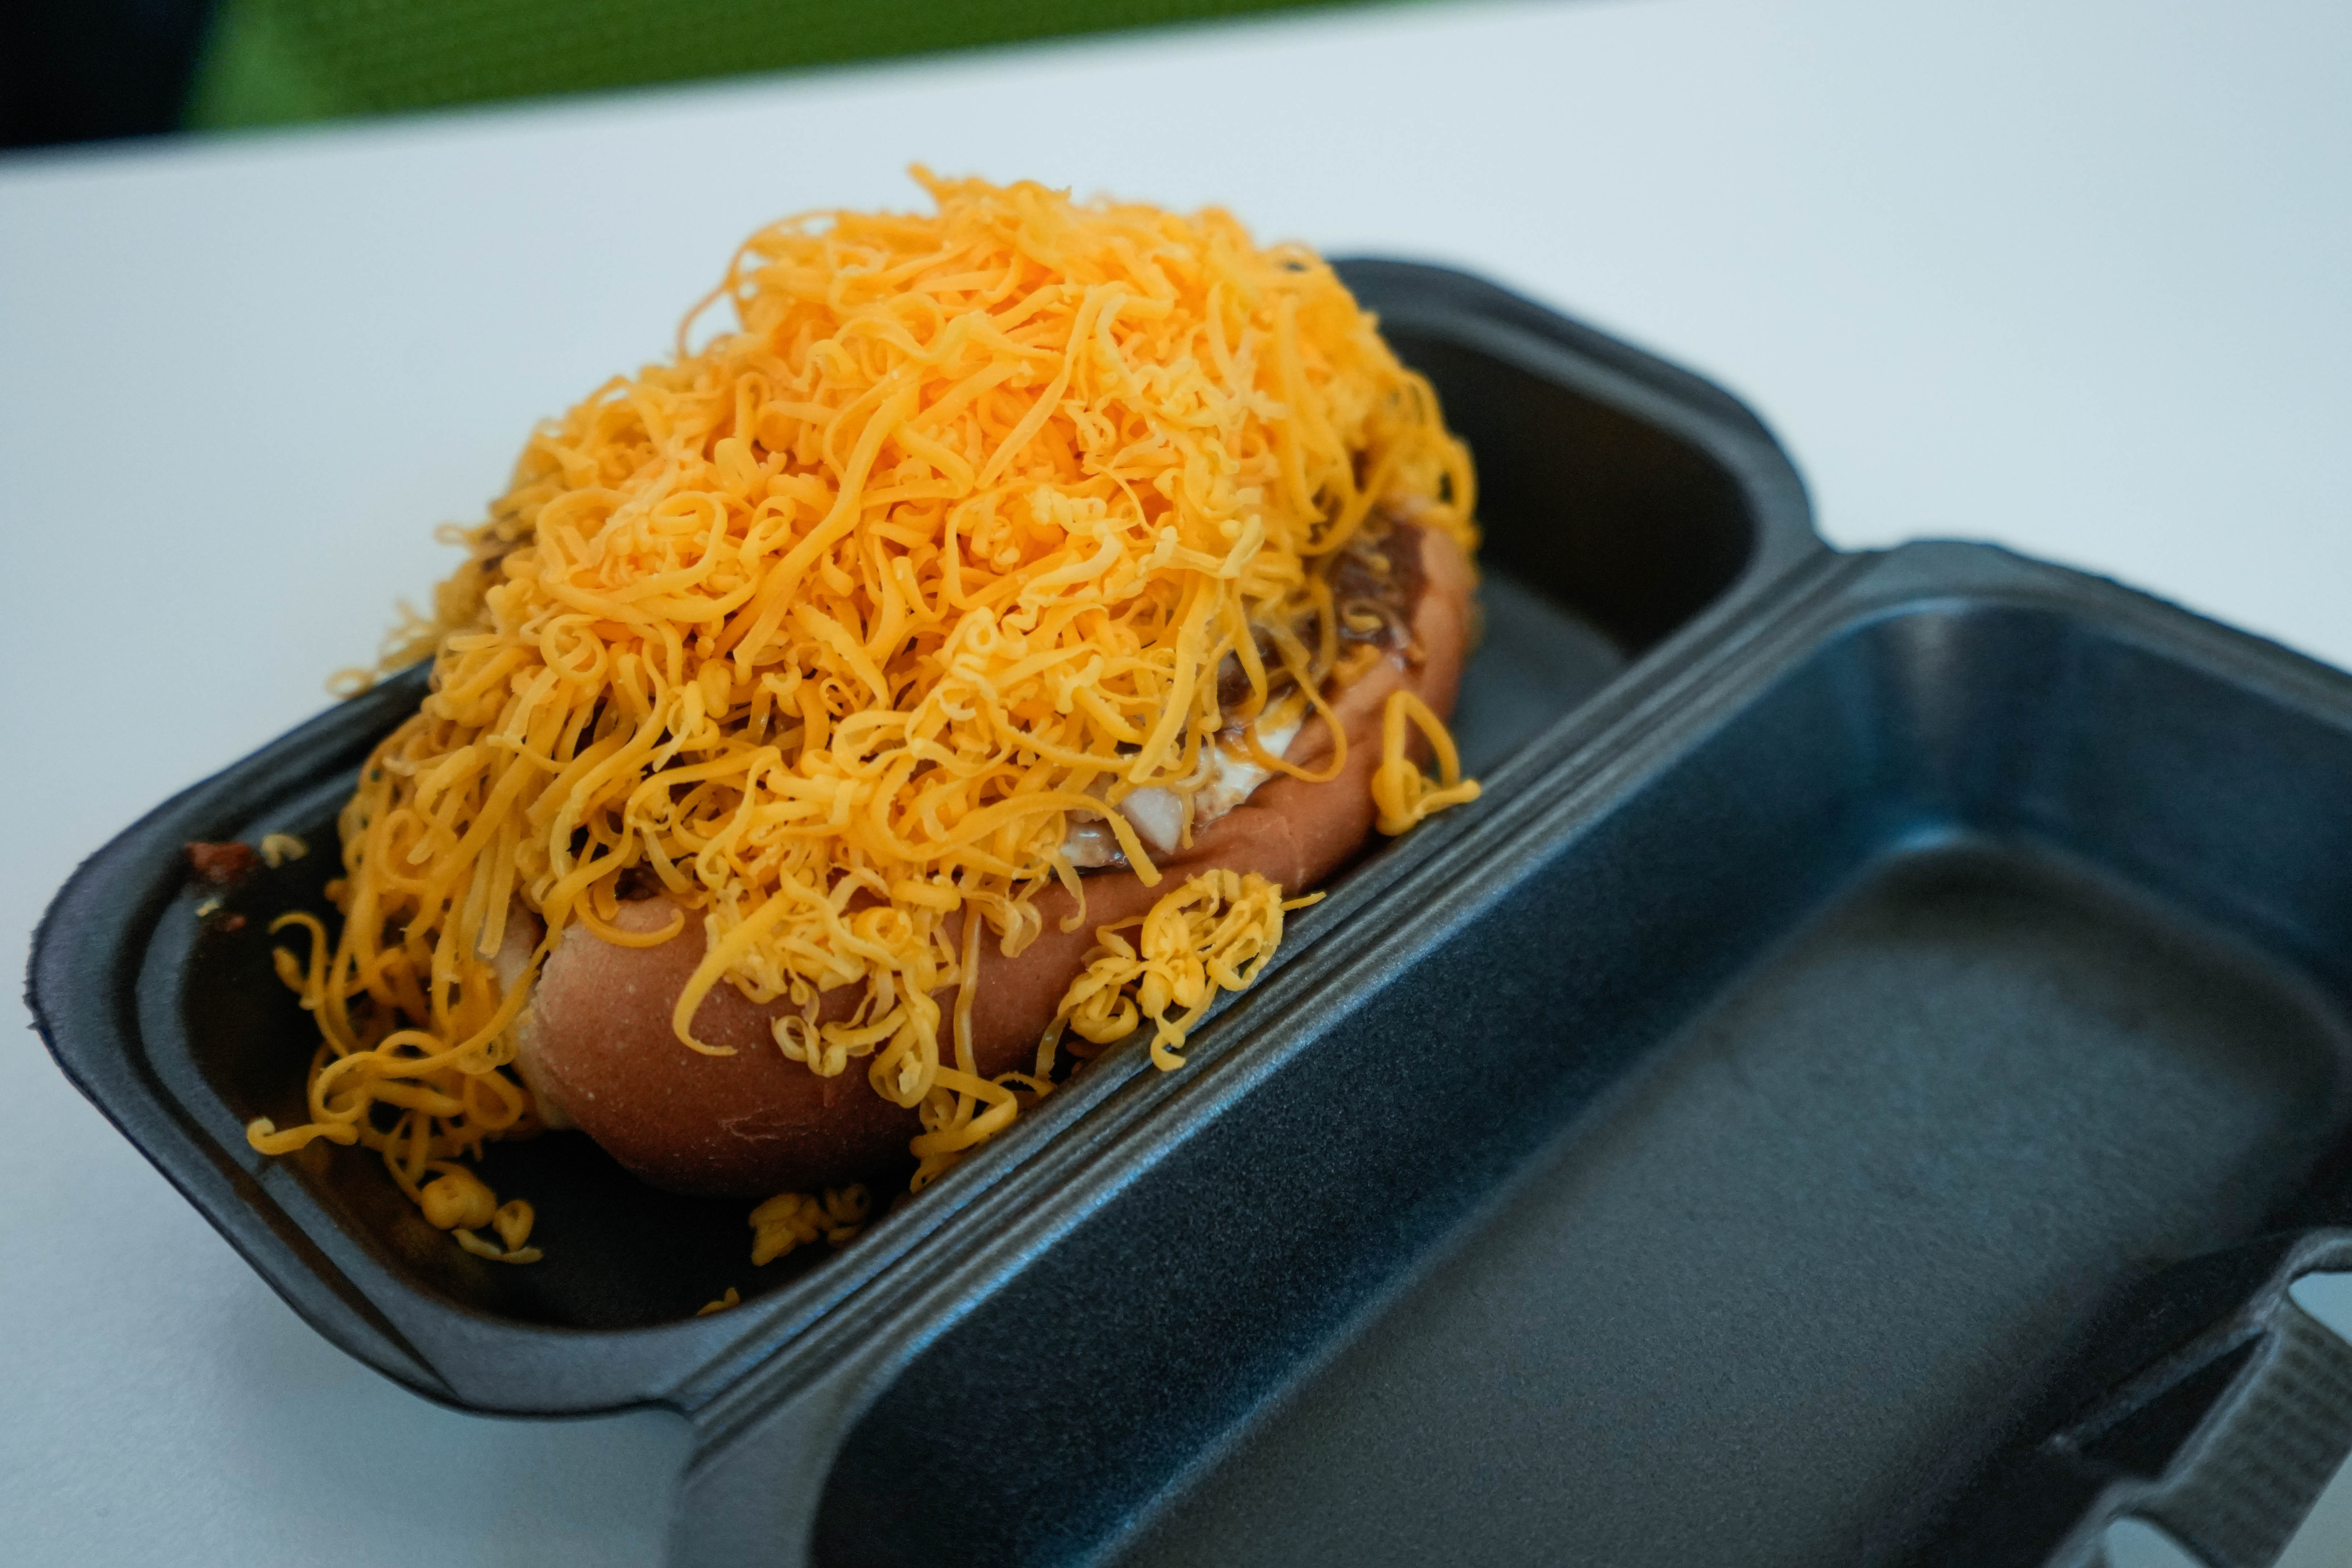 Skyline Chili breakfast starts at certain locations Monday. Here's where to get it